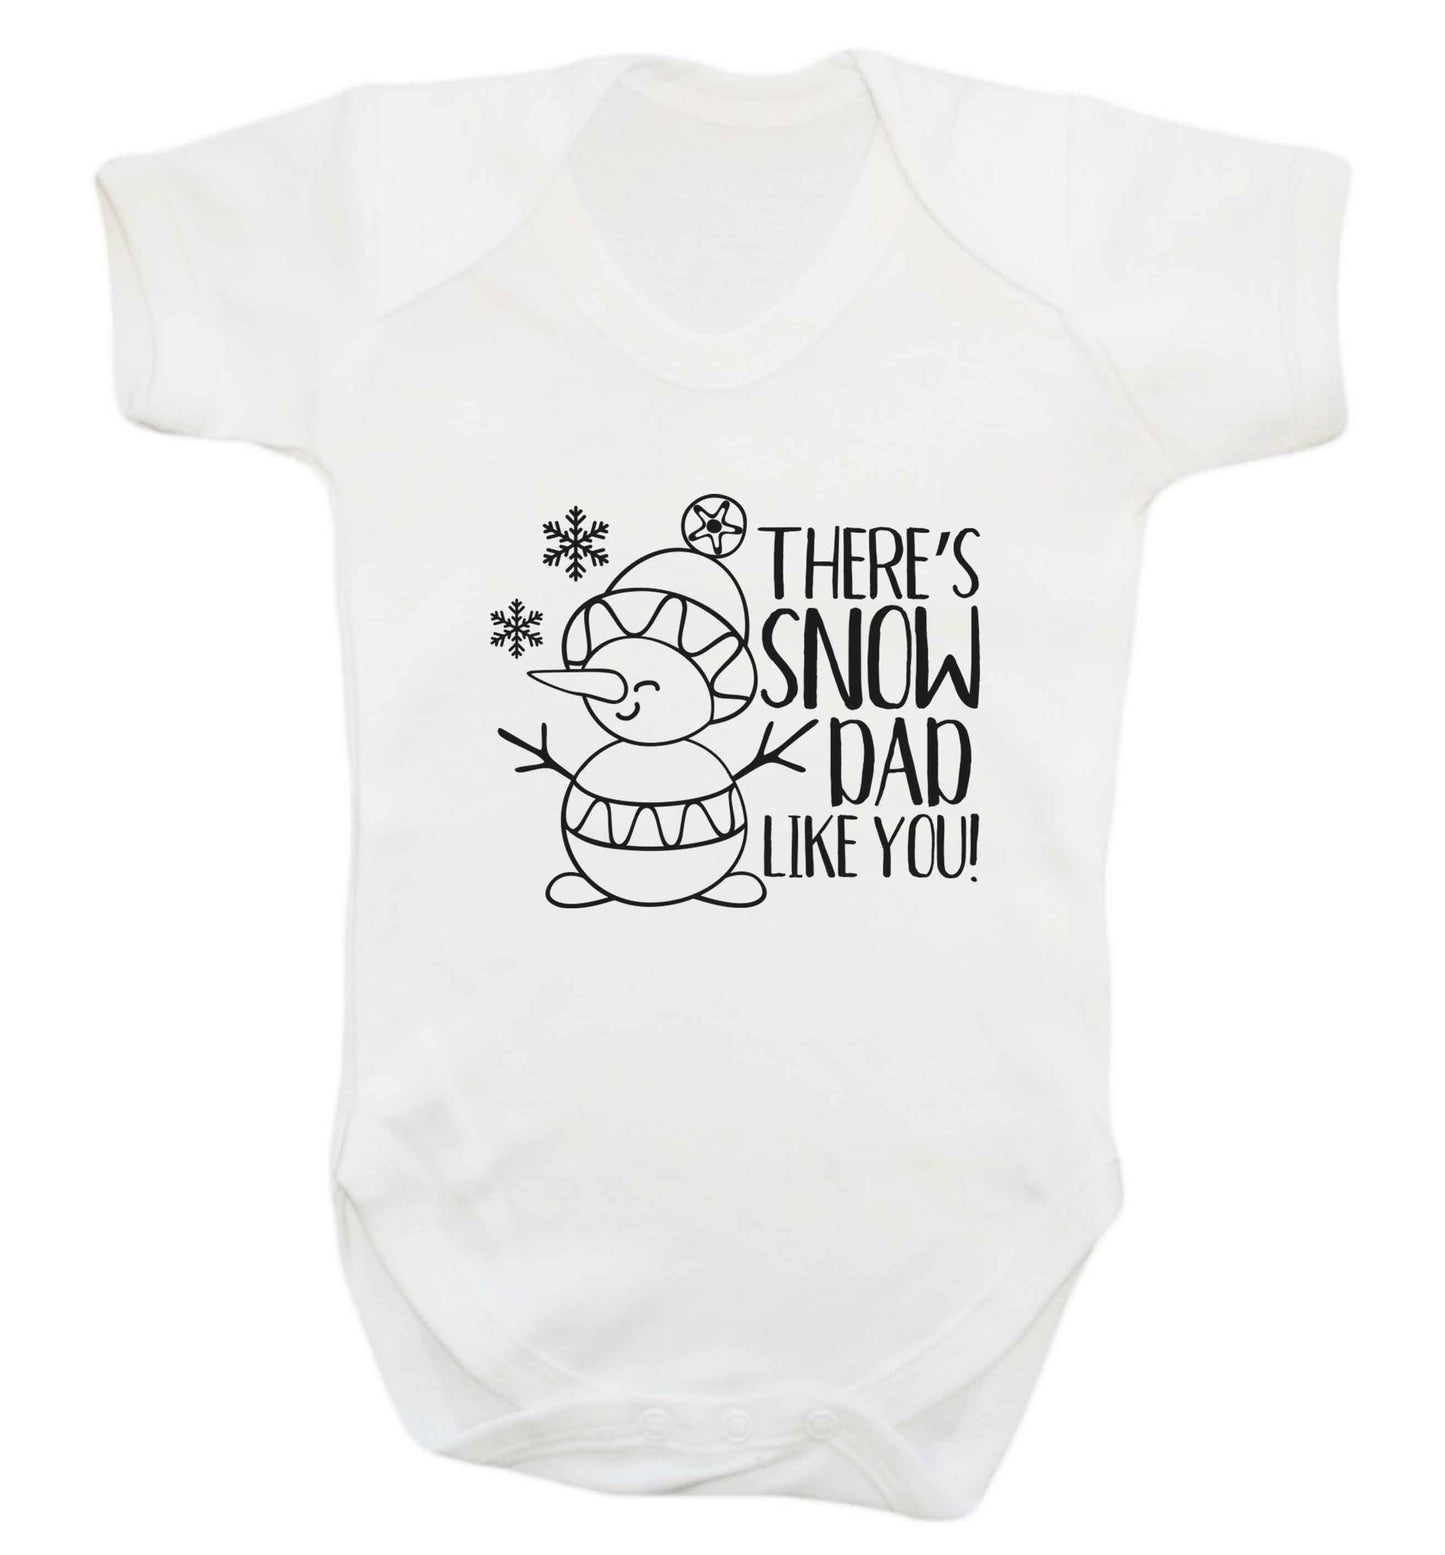 There's snow dad like you baby vest white 18-24 months